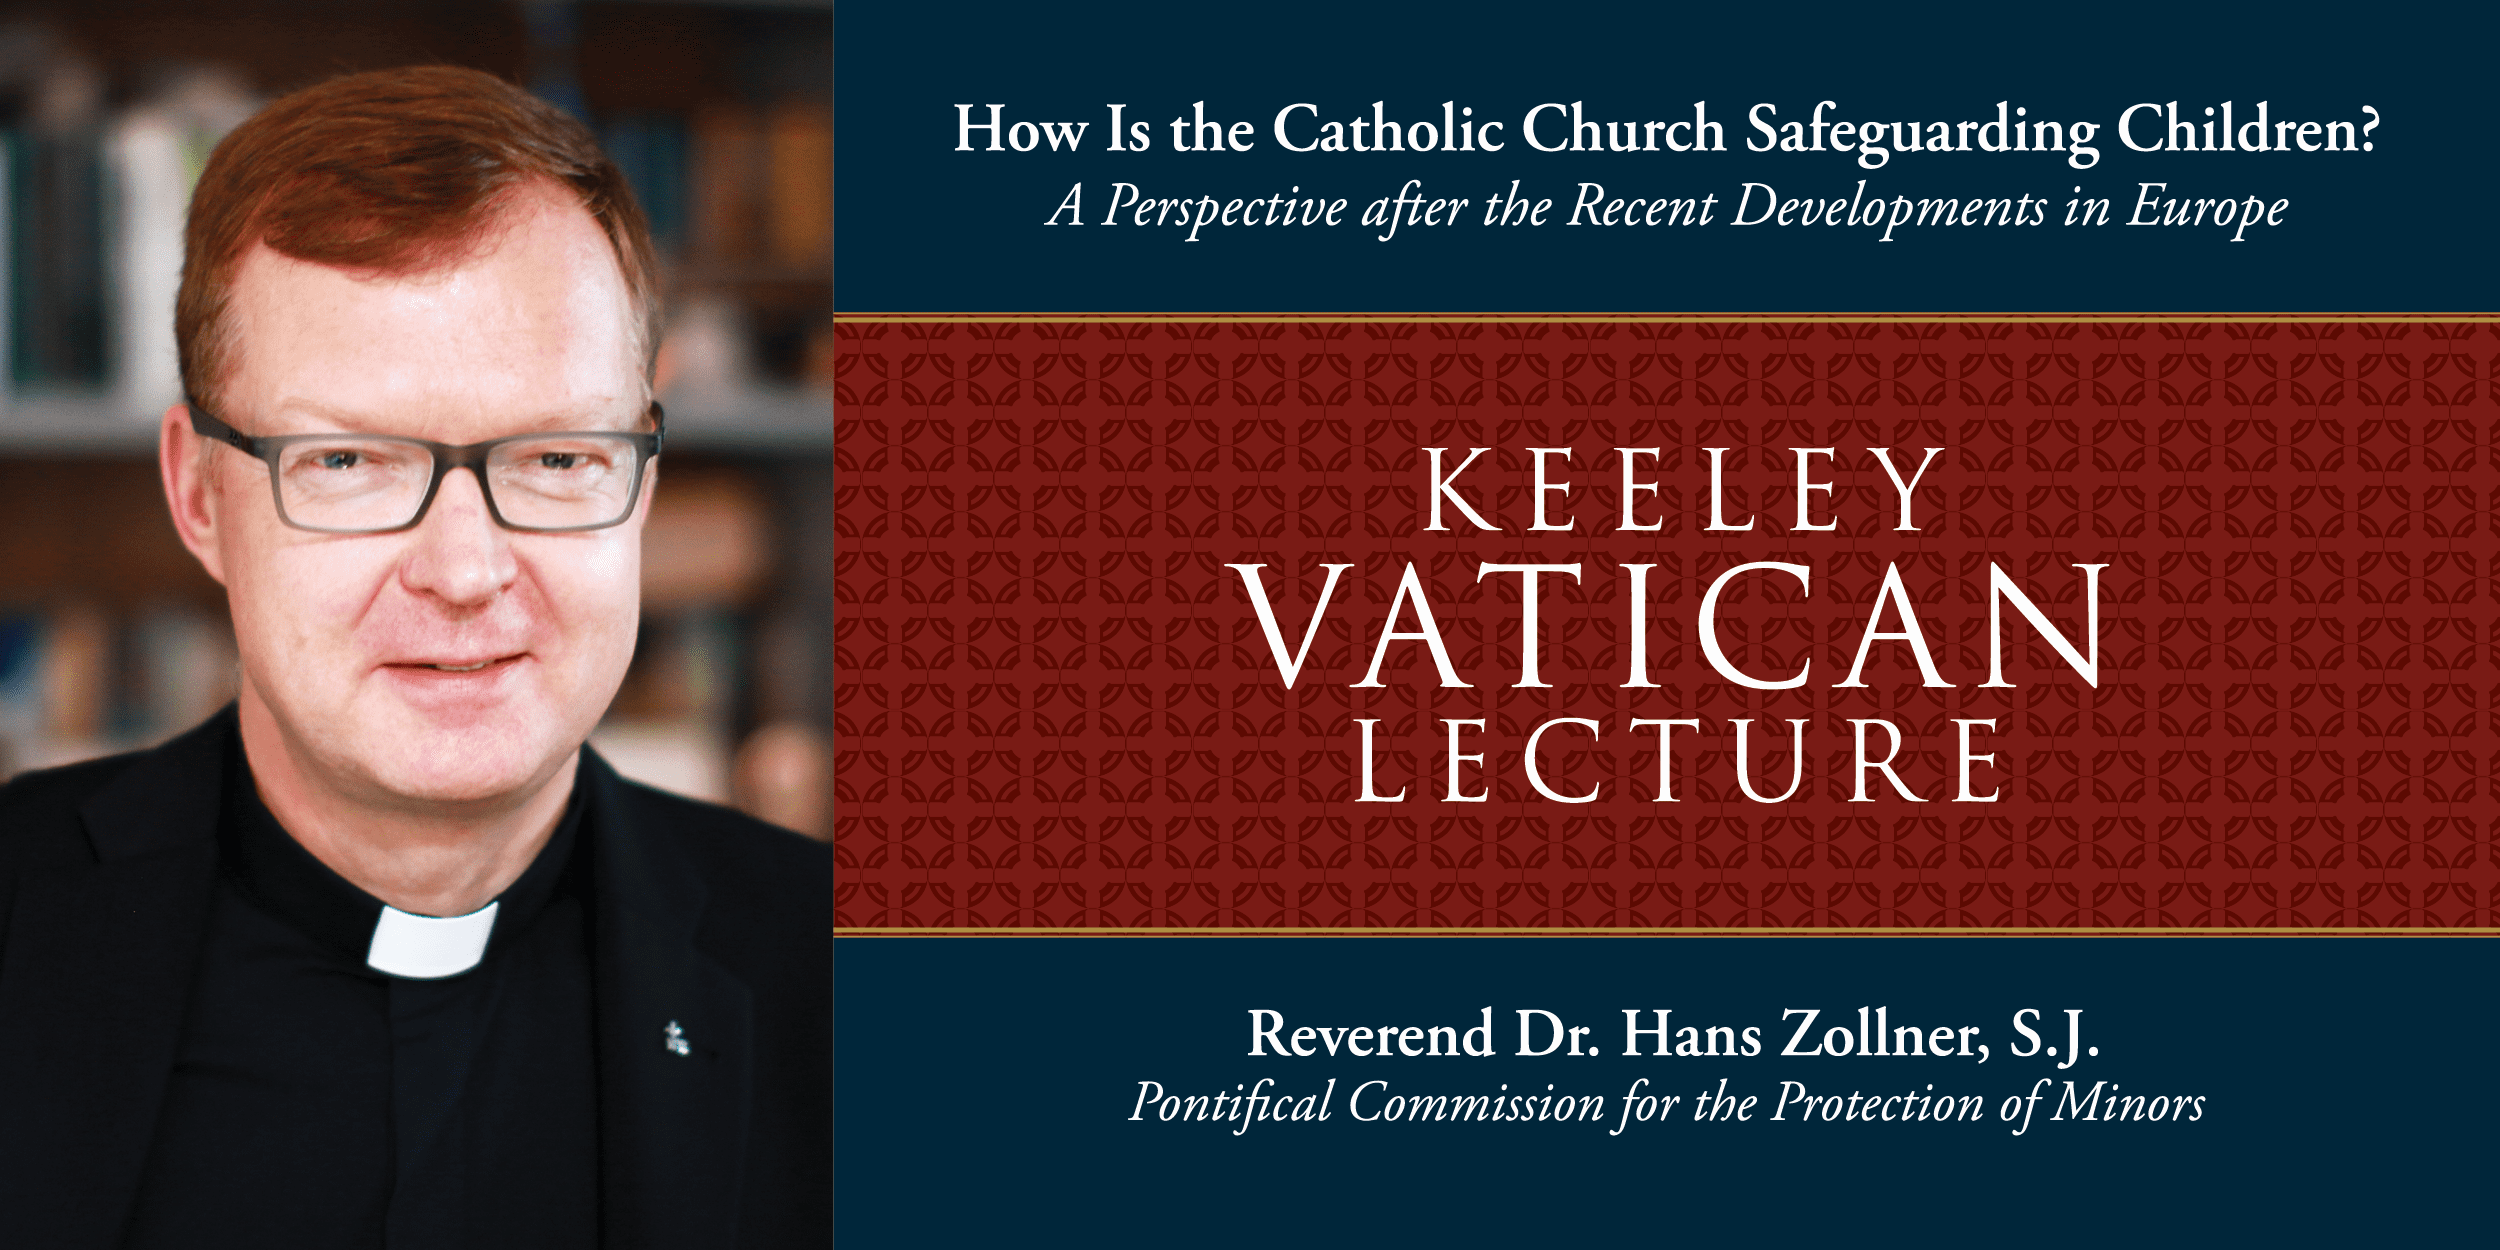 “How Is the Catholic Church Safeguarding Children? A Perspective after the Recent Developments in Europe” — The Keeley Vatican Lecture with Rev. Dr. Hans Zollner, S.J.